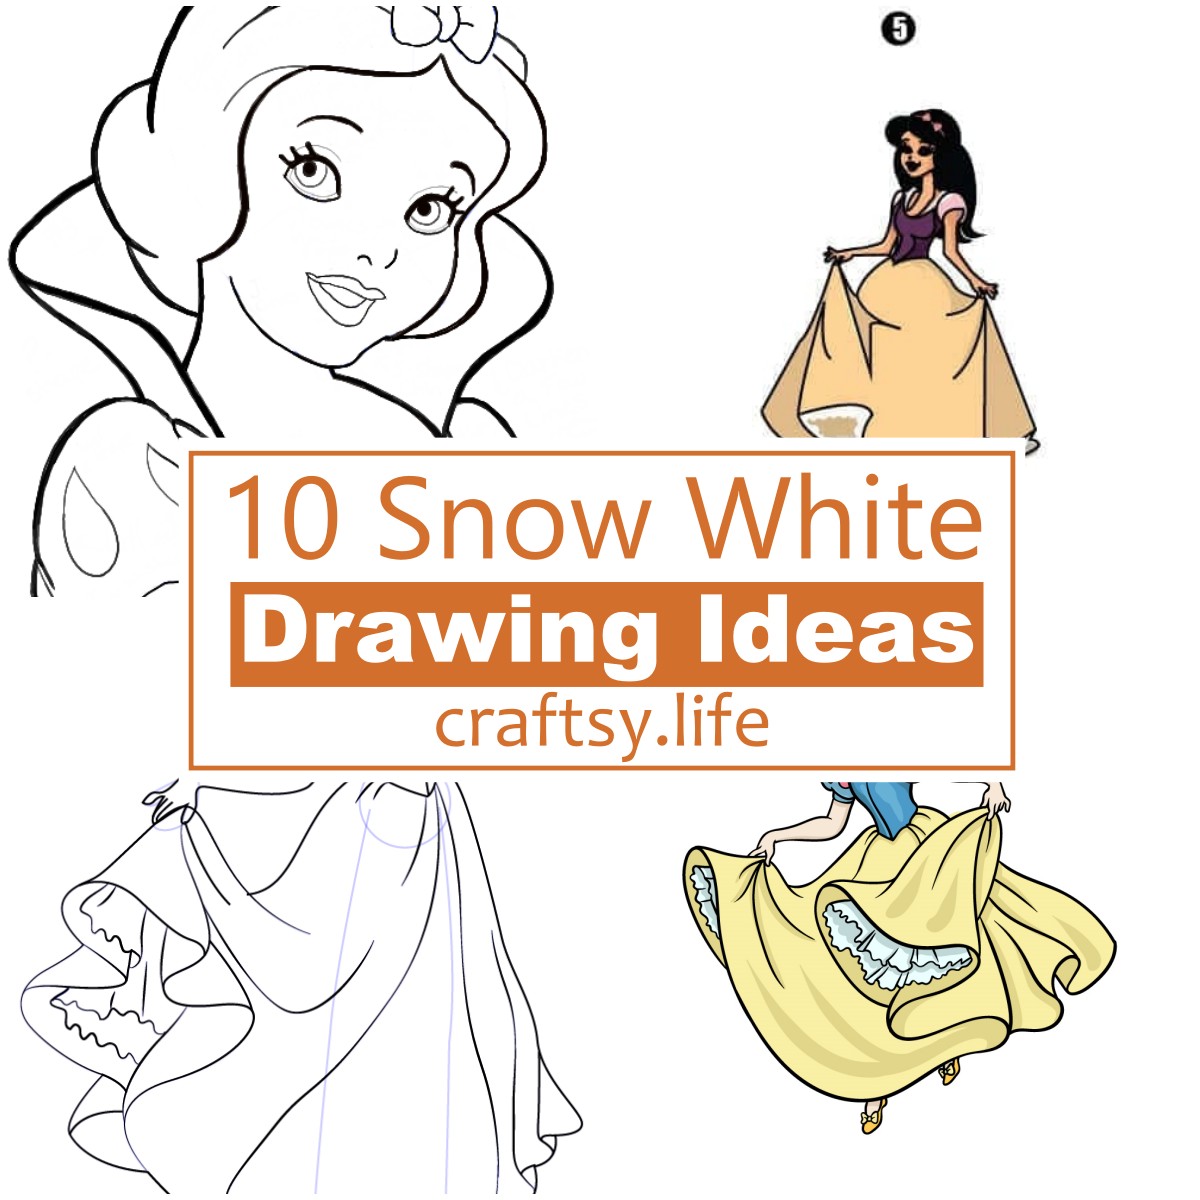 10 Snow White Drawing Ideas